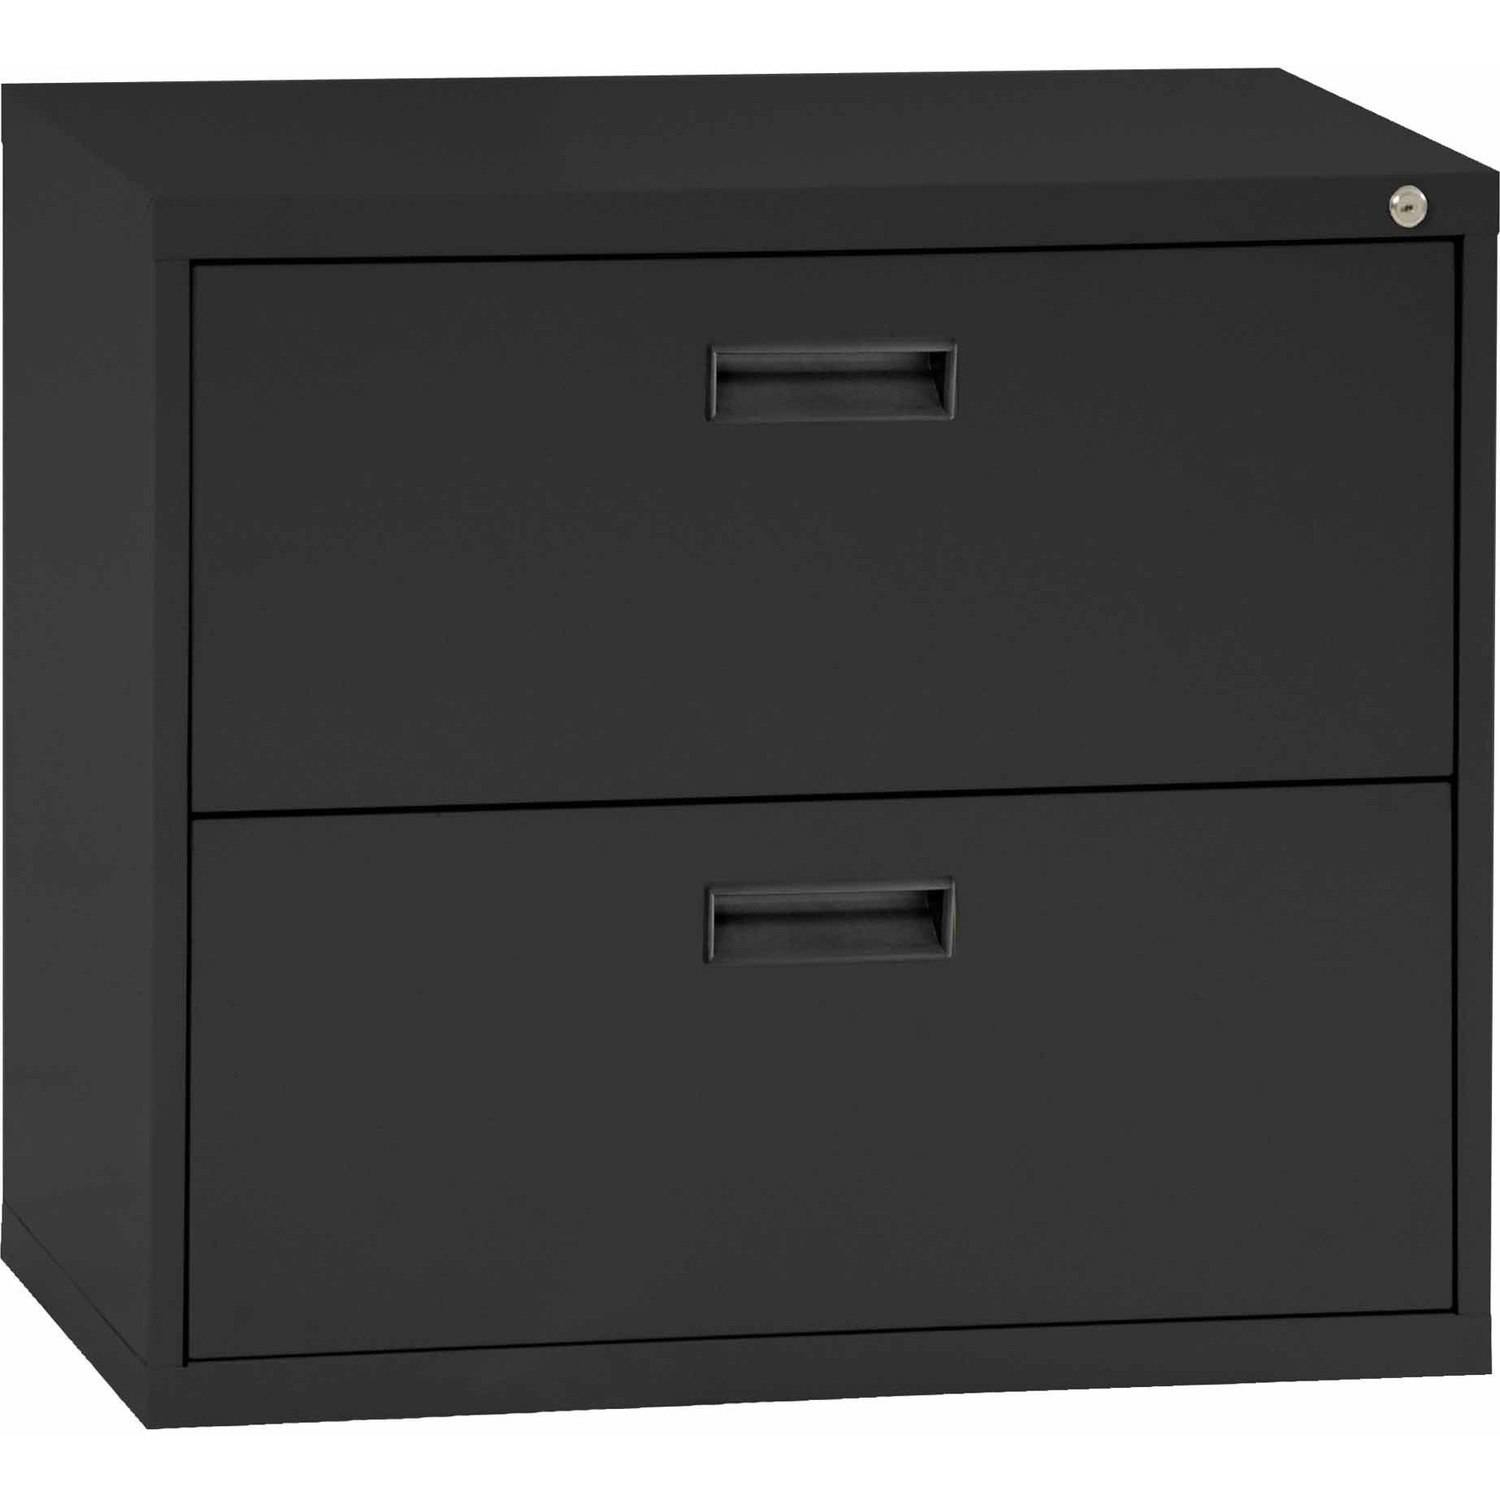 Sandusky Steel Lateral File Cabinet With Plastic Handle 2 Drawers throughout sizing 1500 X 1500